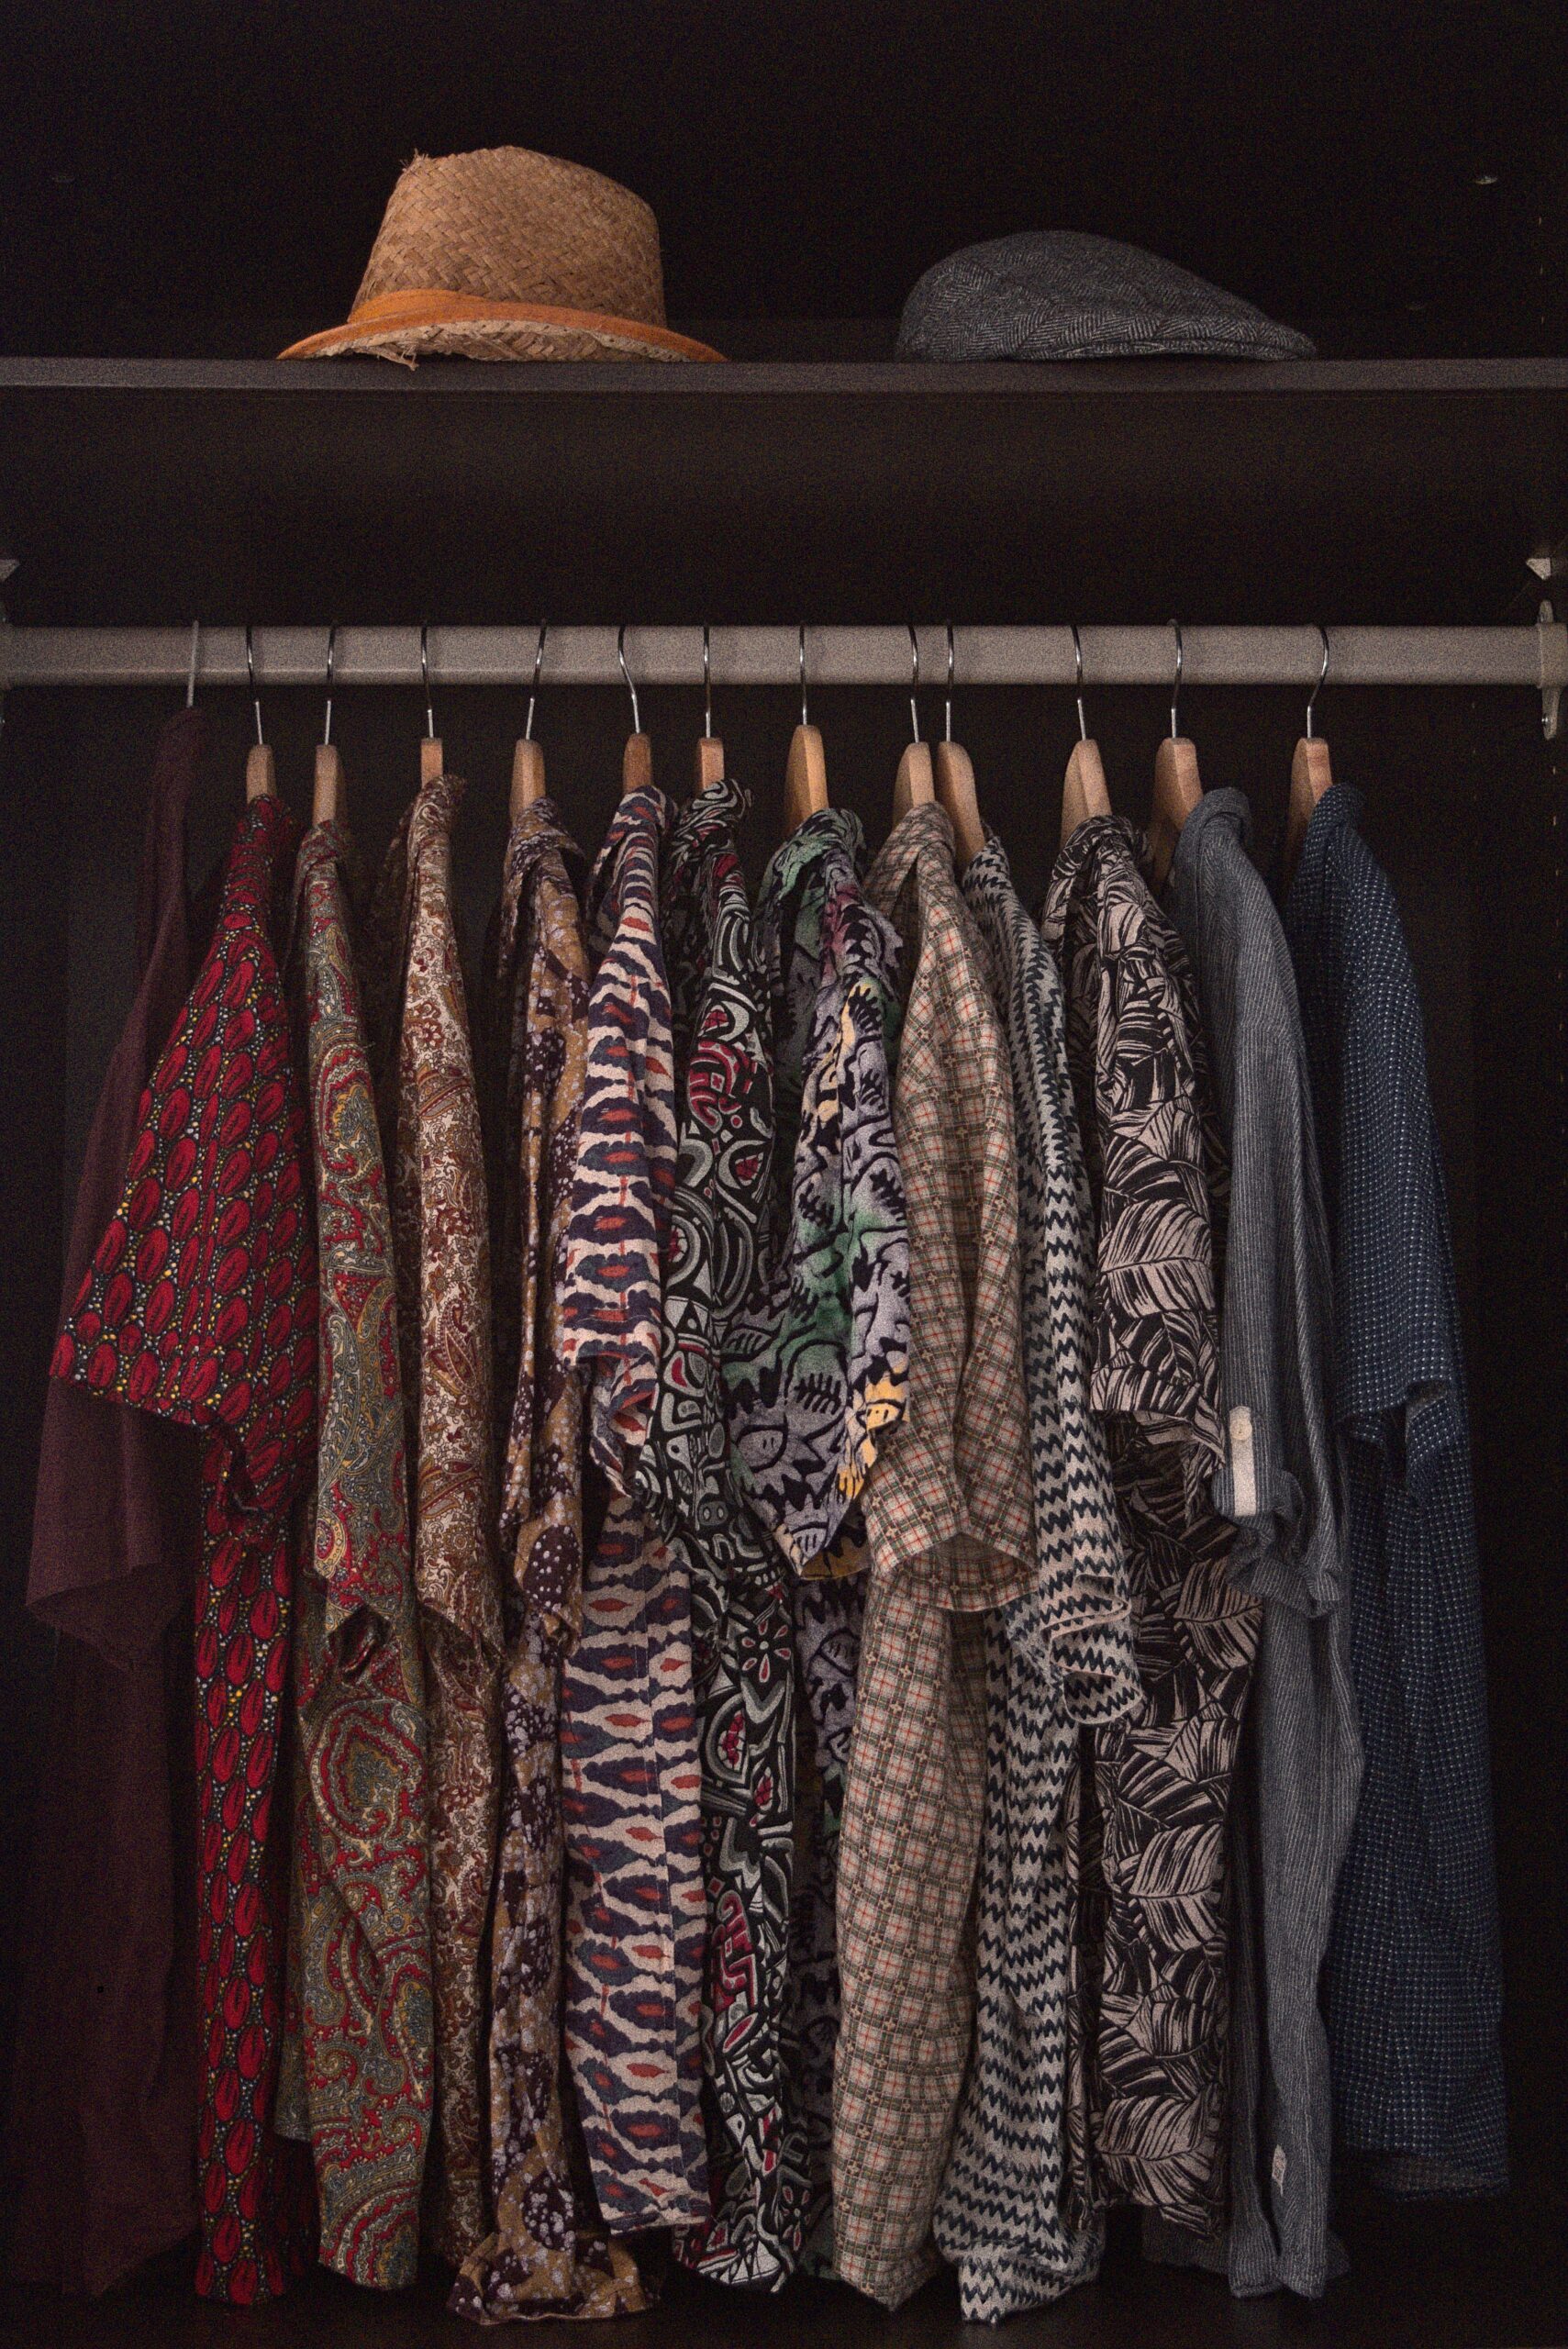 Closet of Aloha shirts in a muted color palette.